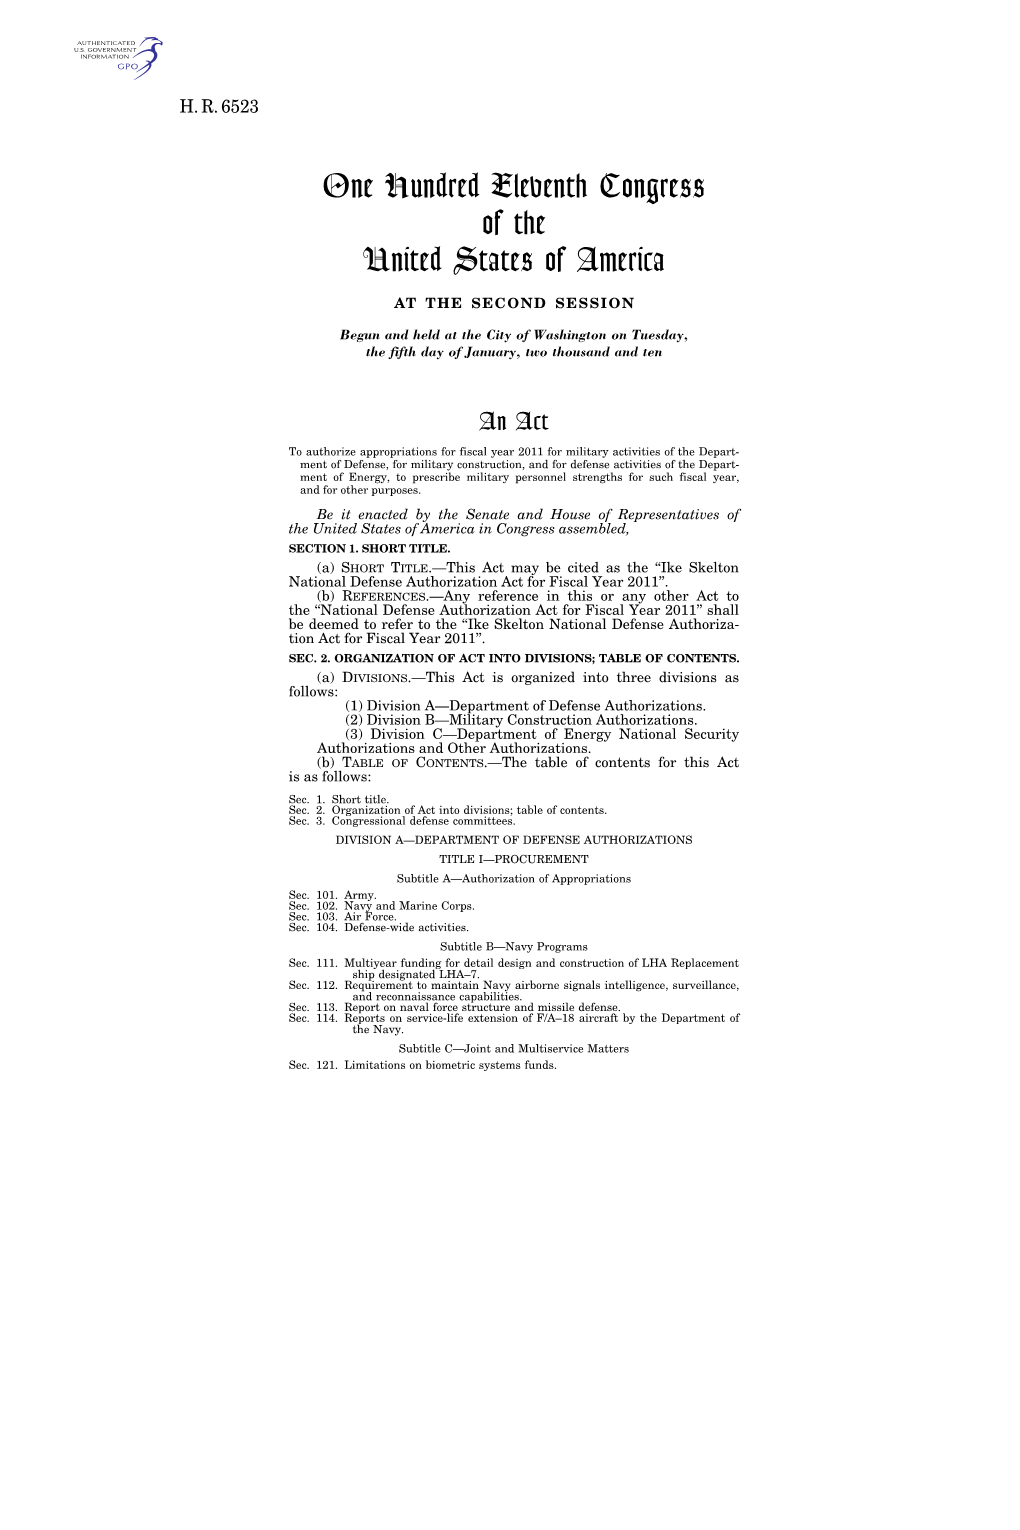 National Defense Authorization Act for Fiscal Year 2011’’